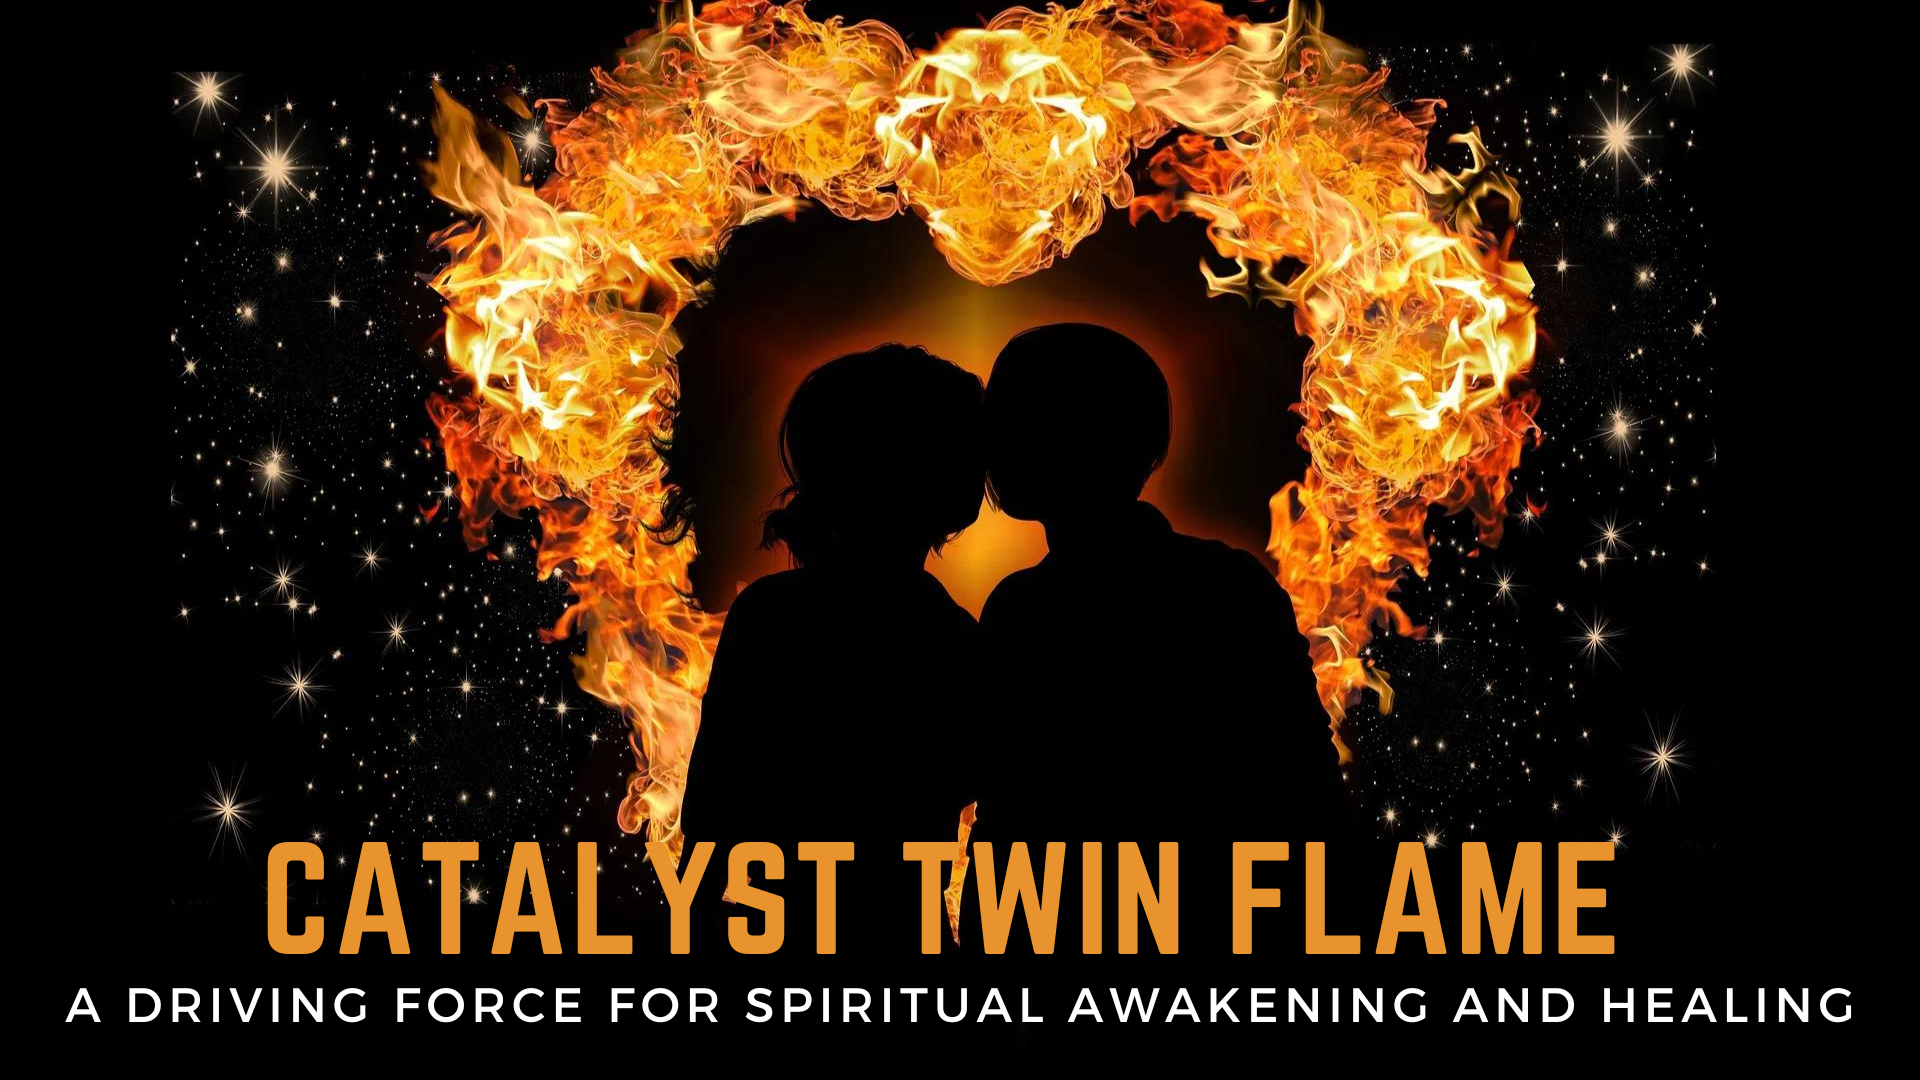 Catalyst Twin Flame - A Driving Force For Spiritual Awakening And Healing